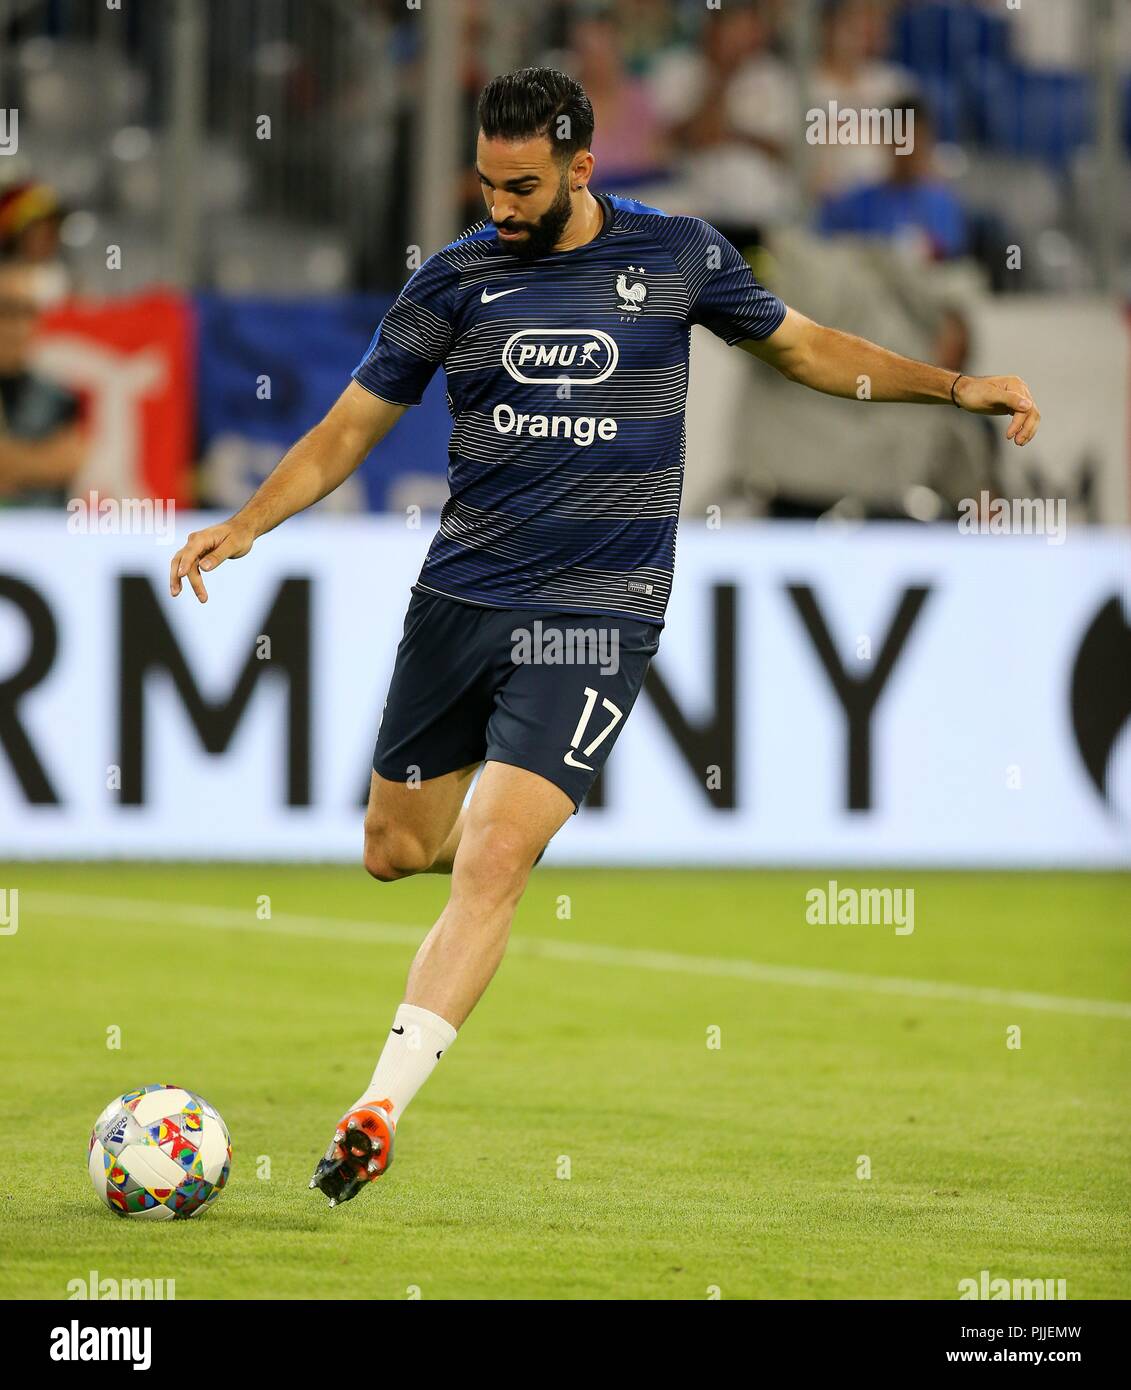 firo: 06.09.2018 Fuvuball, Football, National Team, Germany, UEFA, Nations League, Division A, League A, GER, Germany - FRA, France Adil Rami, France, FRA, Full Character, Single Action | usage worldwide Stock Photo